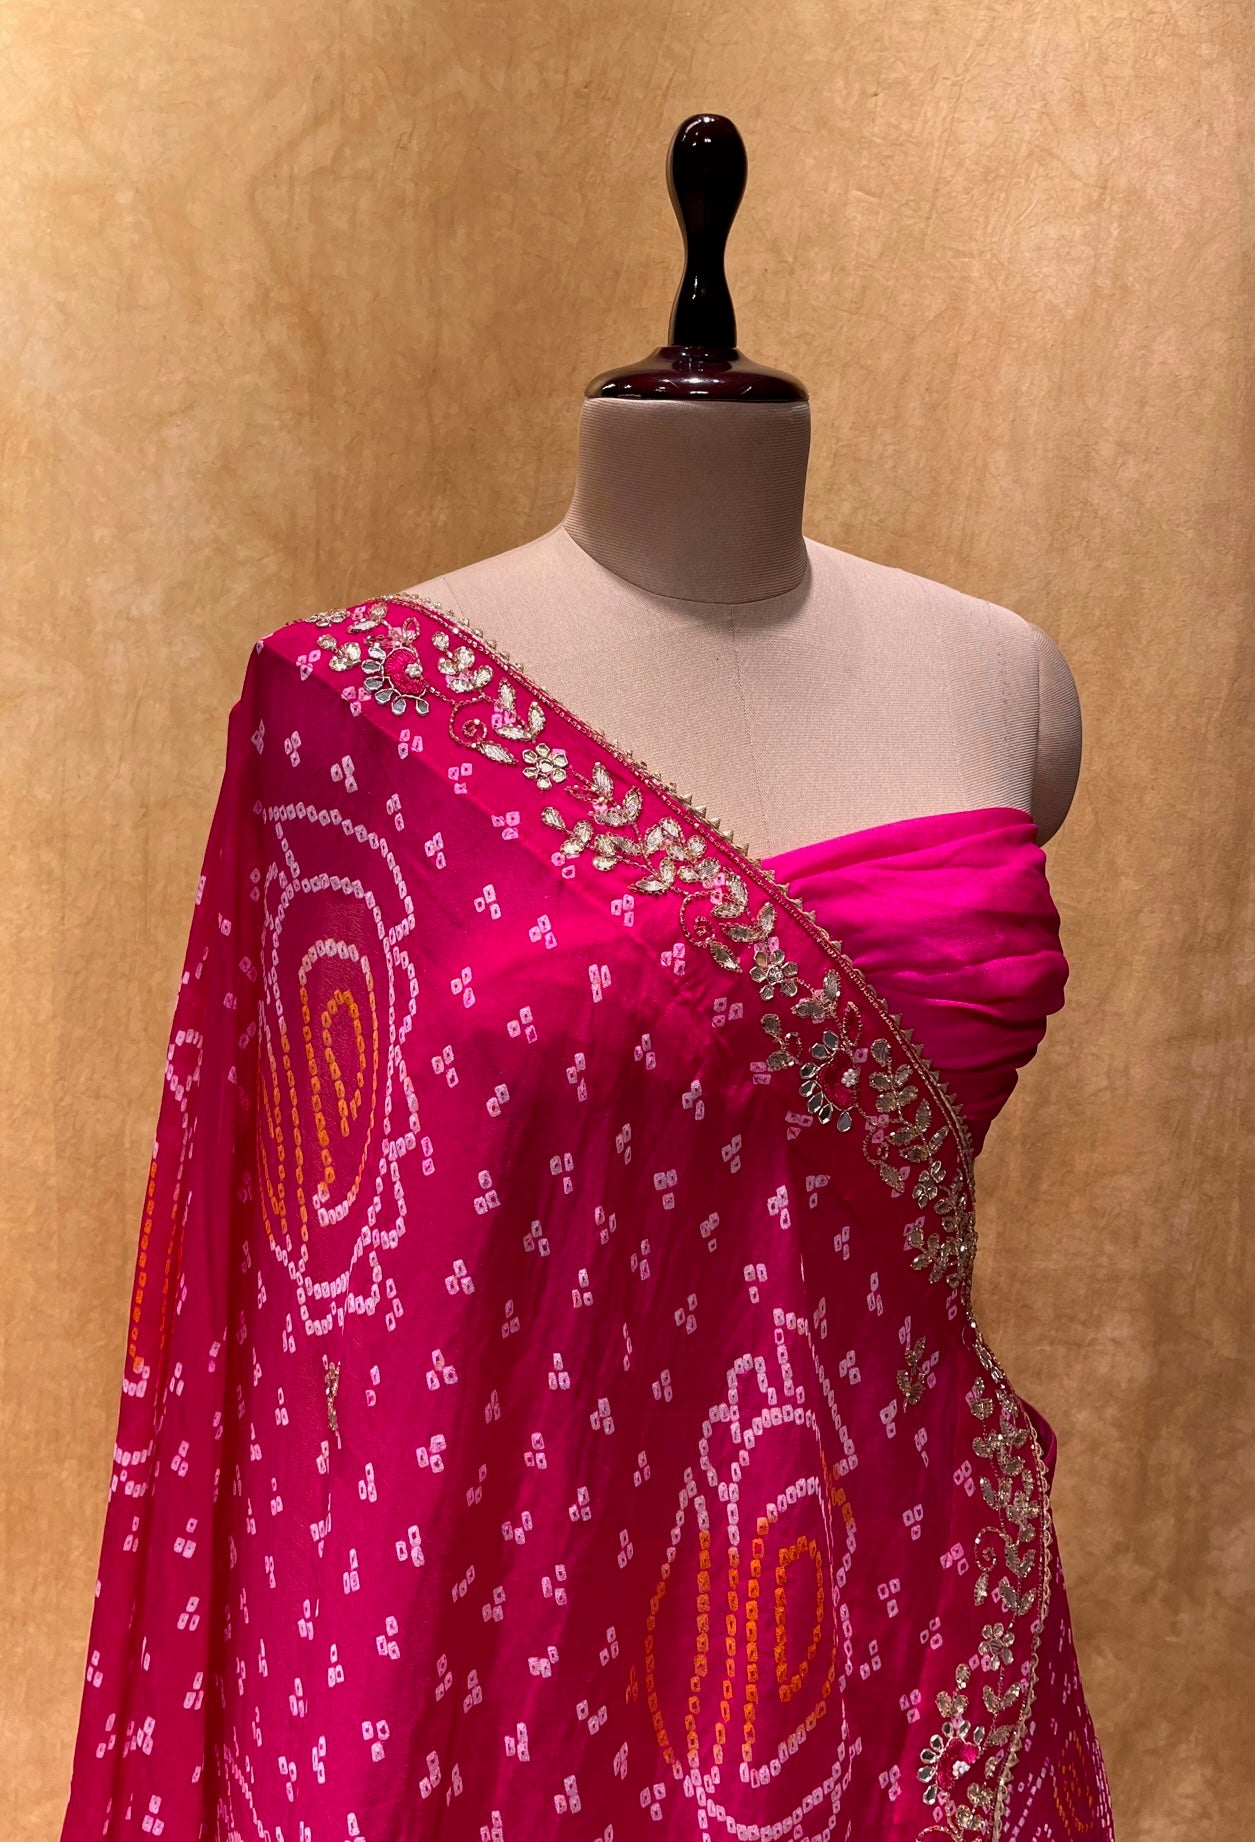 (DELIVERY IN 20-25 DAYS) PINK COLOUR BANDHEJ LEHENGA WITH UNSTITCHED BLOUSE EMBELLISHED WITH GOTA PATTI & CUTDANA WORK